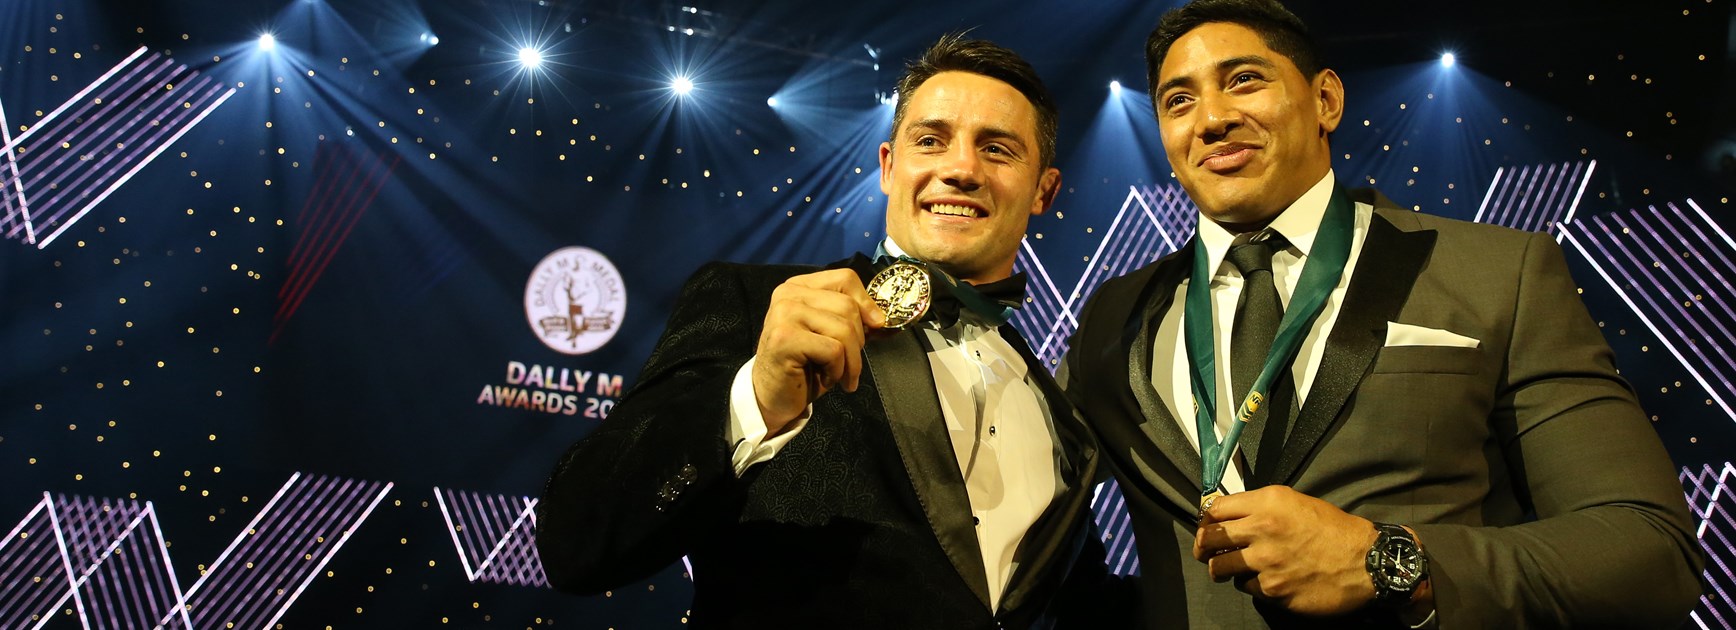 The Dally Ms - a proud history of excellence with a dash of controversy